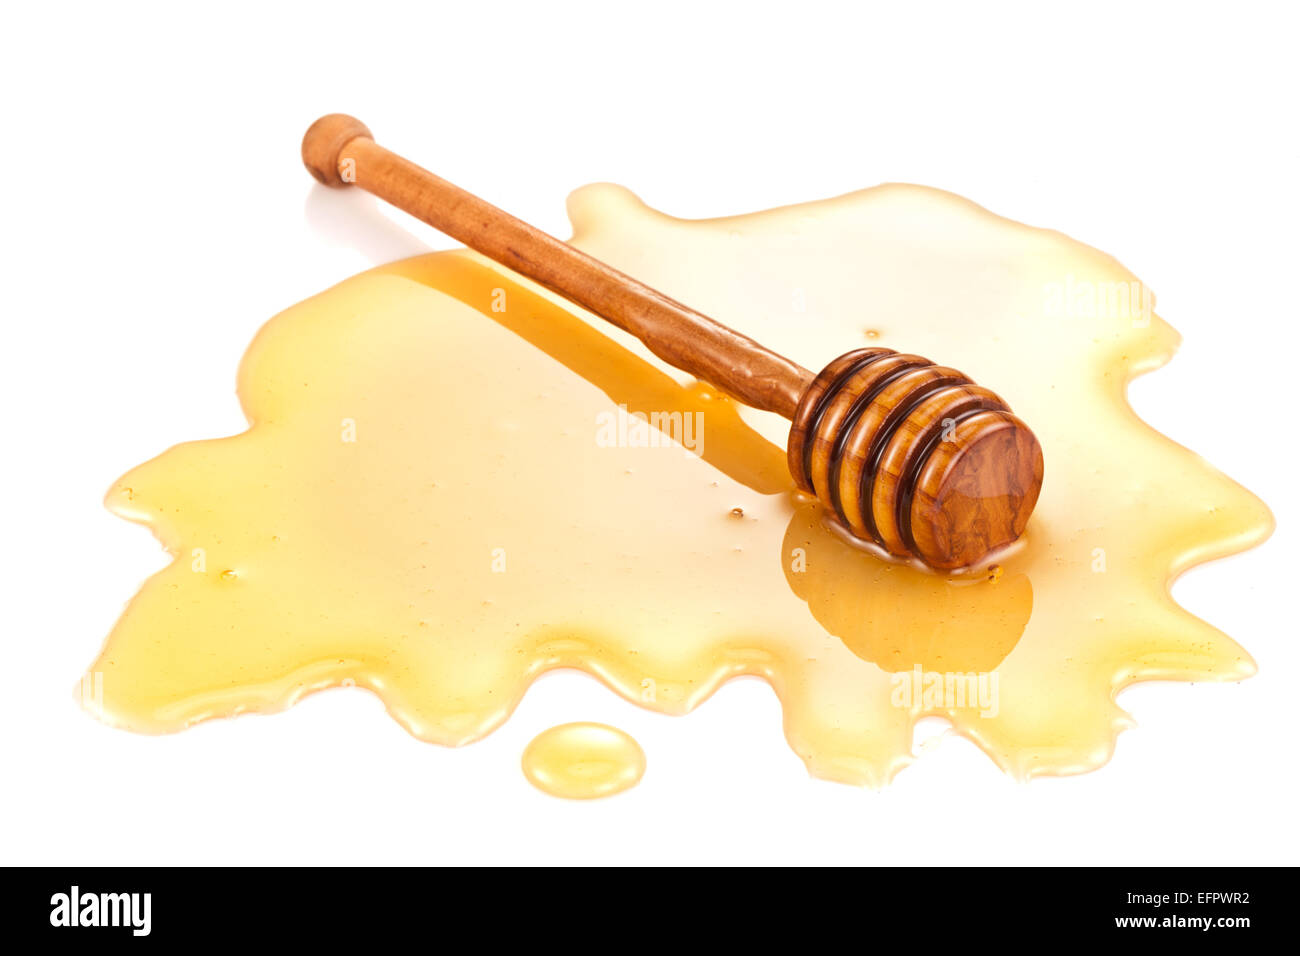 Wooden stick in the honey stain. Clipping paths. Stock Photo